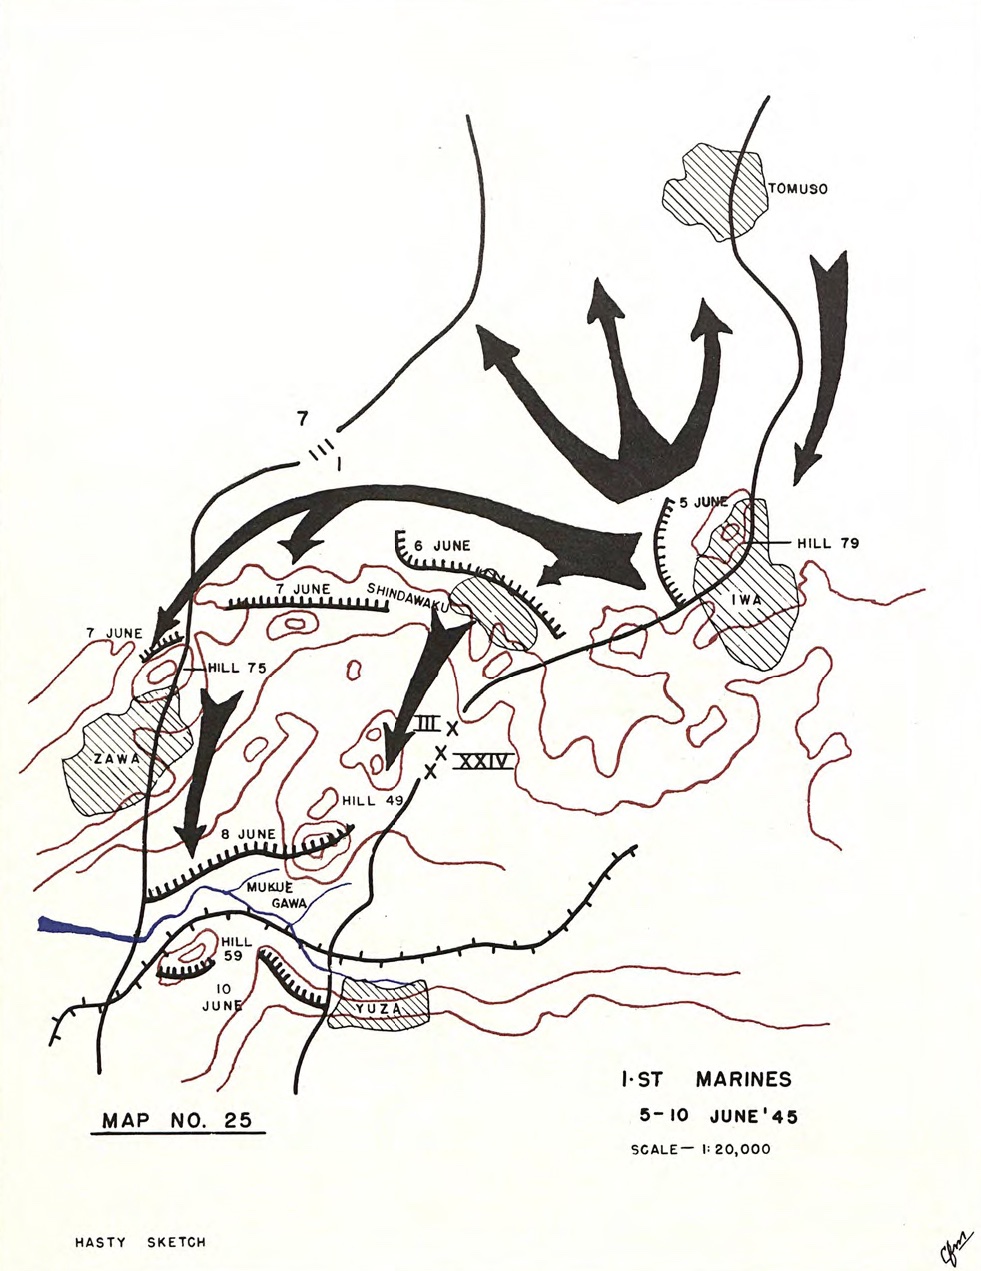 Sketch Map for 1st Marines, June 5-10, 1945